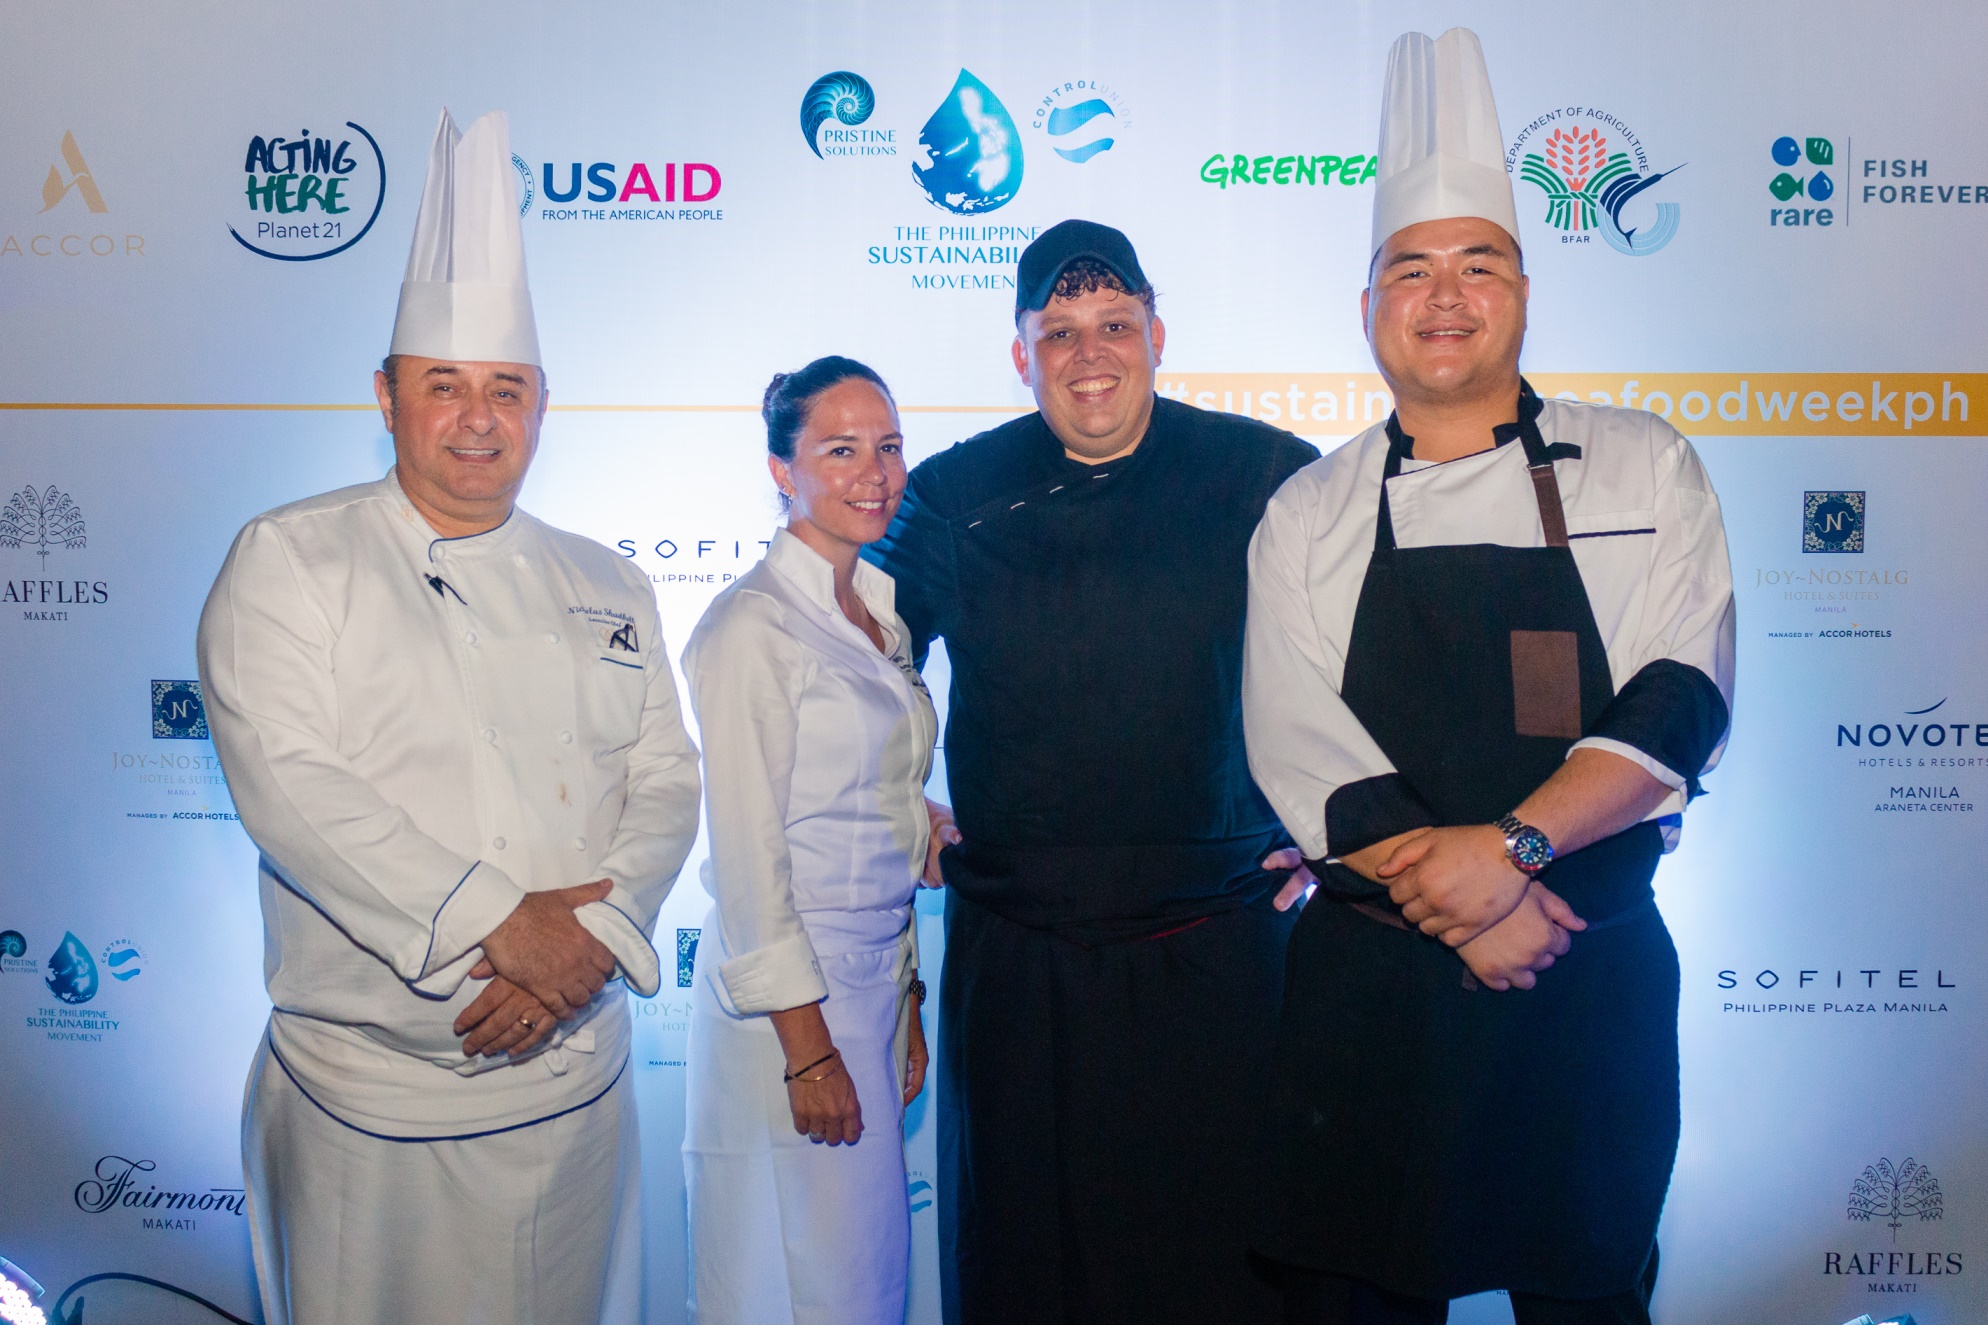 Sustainable dining and hospitality as practiced by Accor Philippines hotels